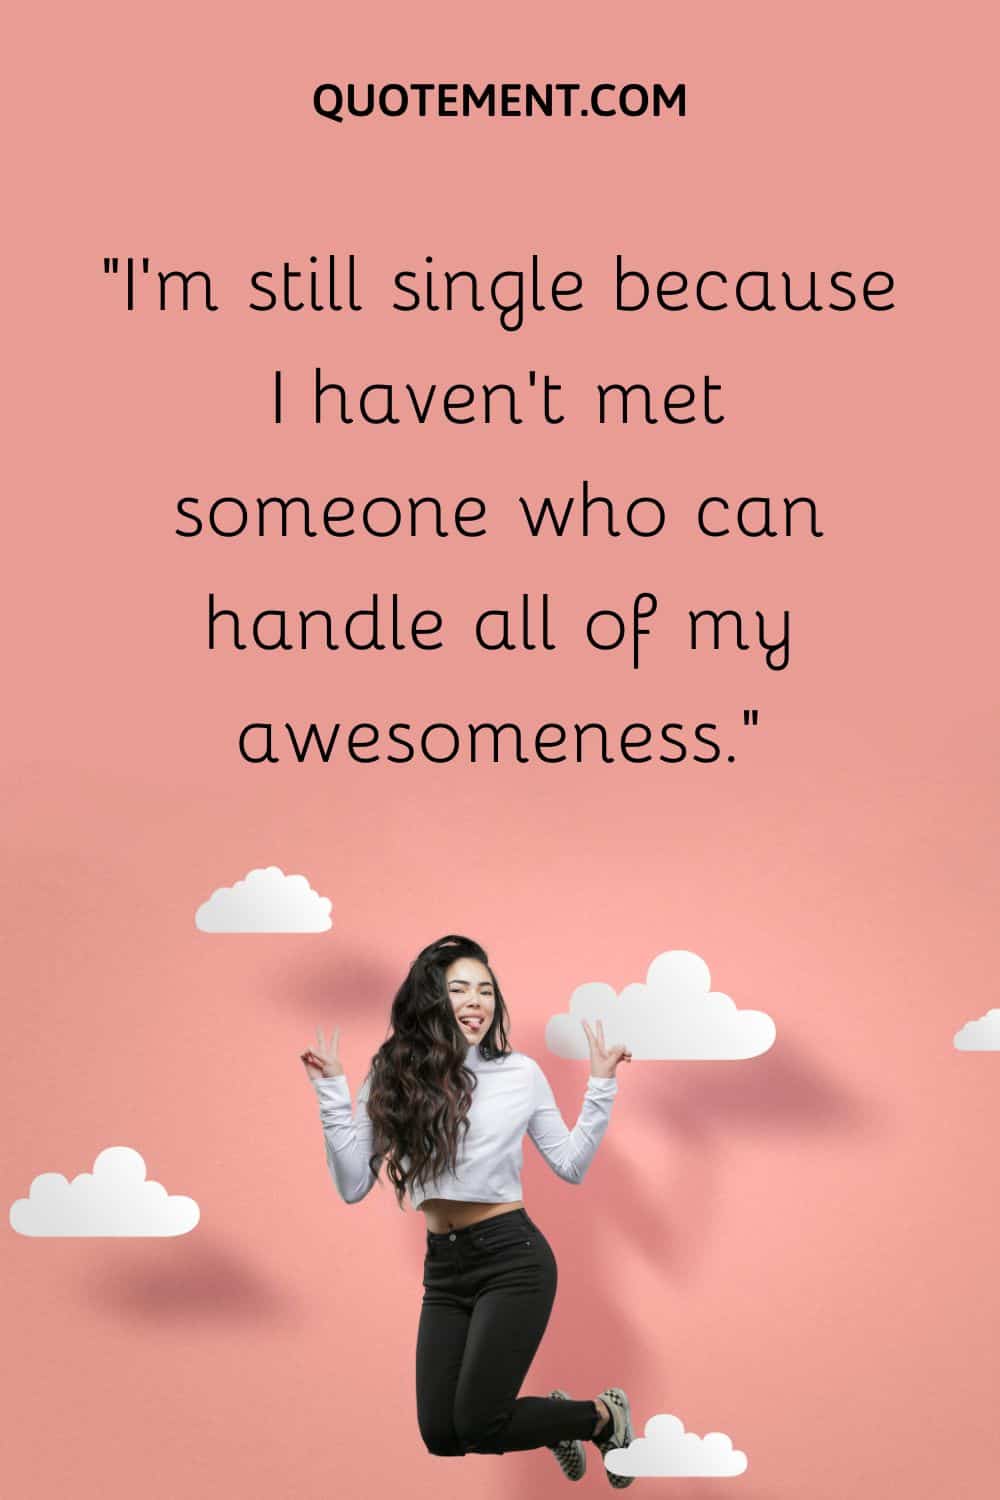 I’m still single because I haven’t met someone who can handle all of my awesomeness